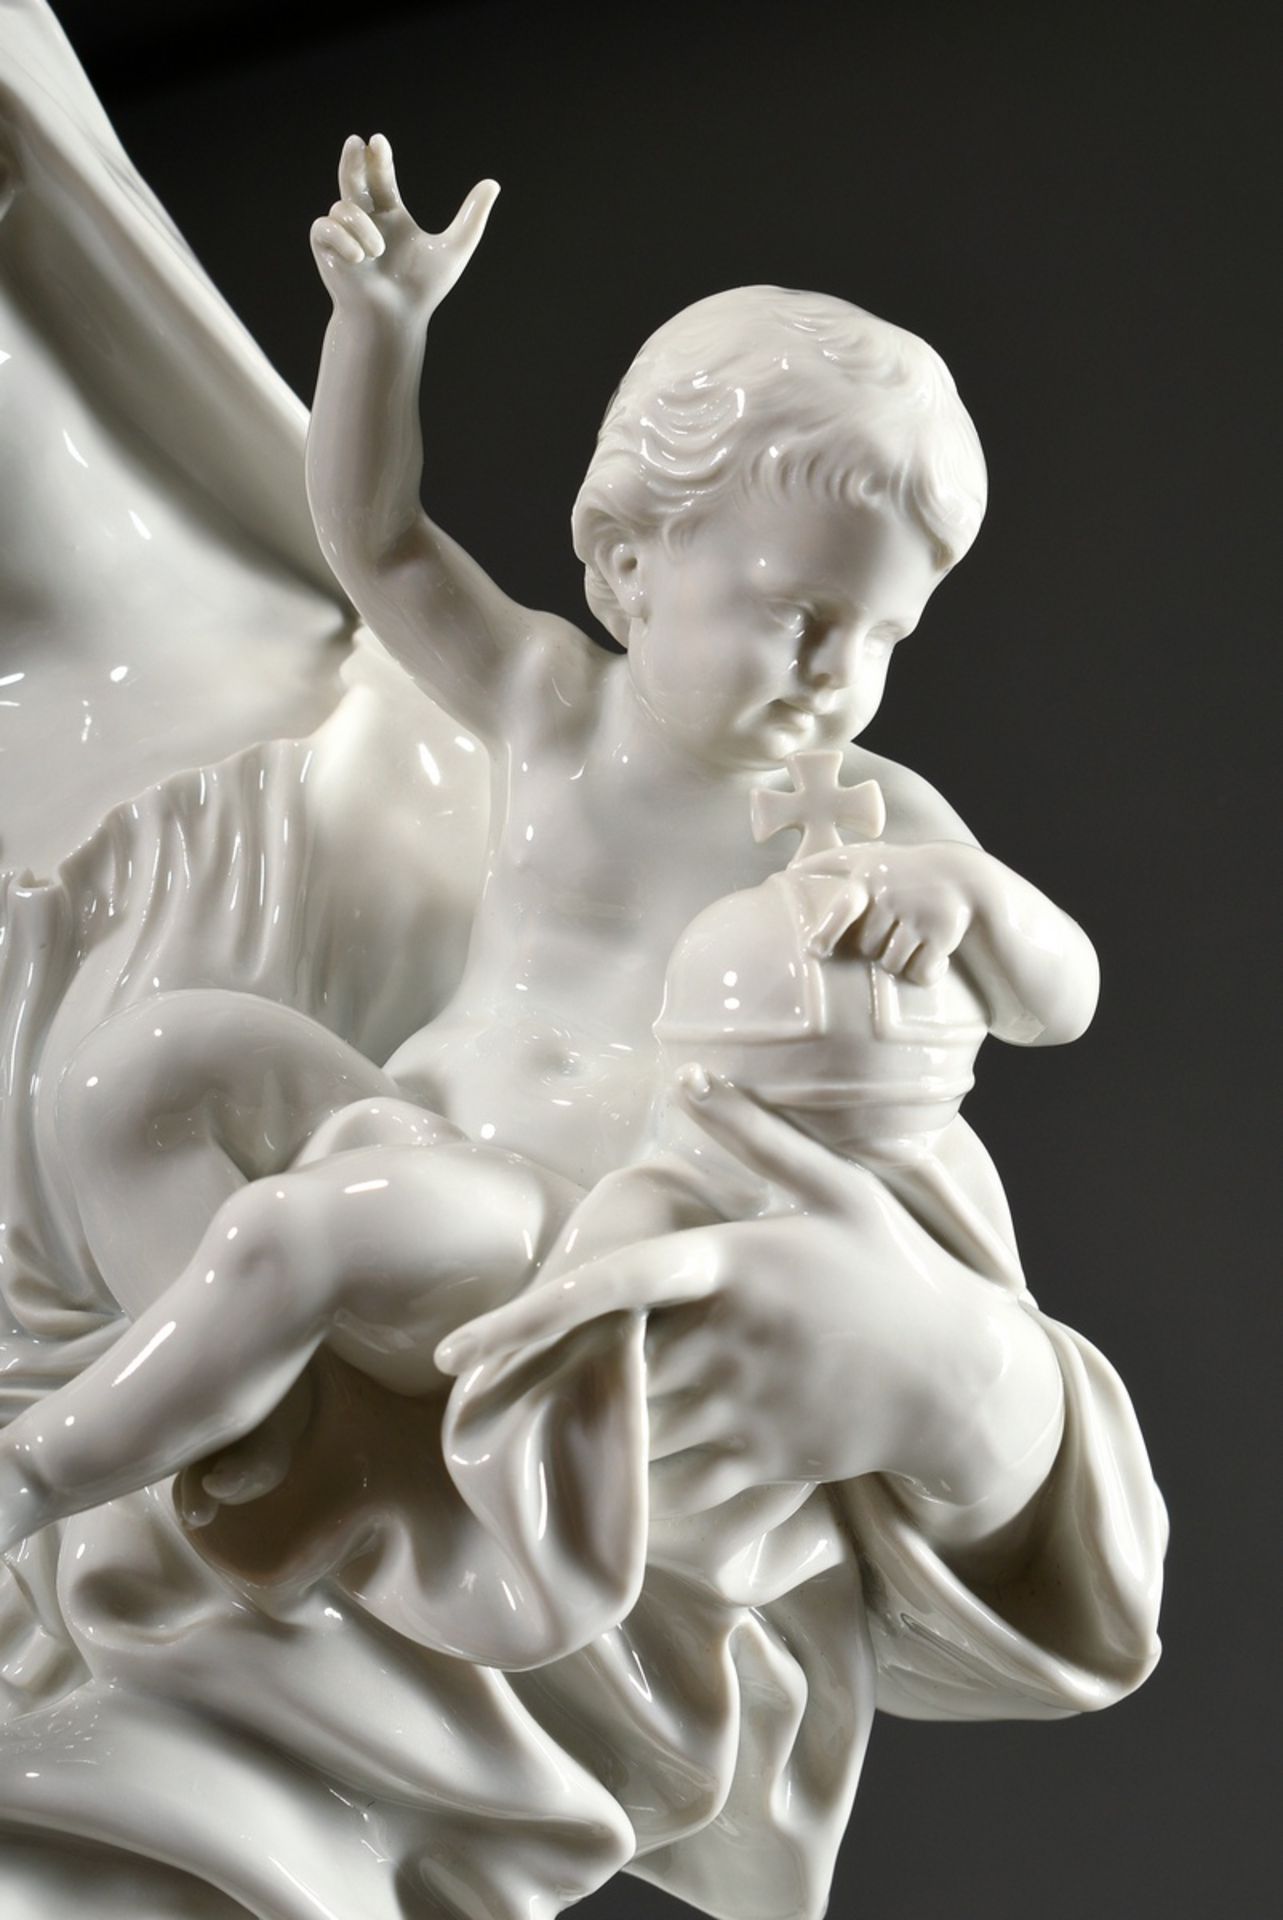 Large Meissen white porcelain figure "Madonna with the Child on the Globe", designed by Johann Gott - Image 3 of 11